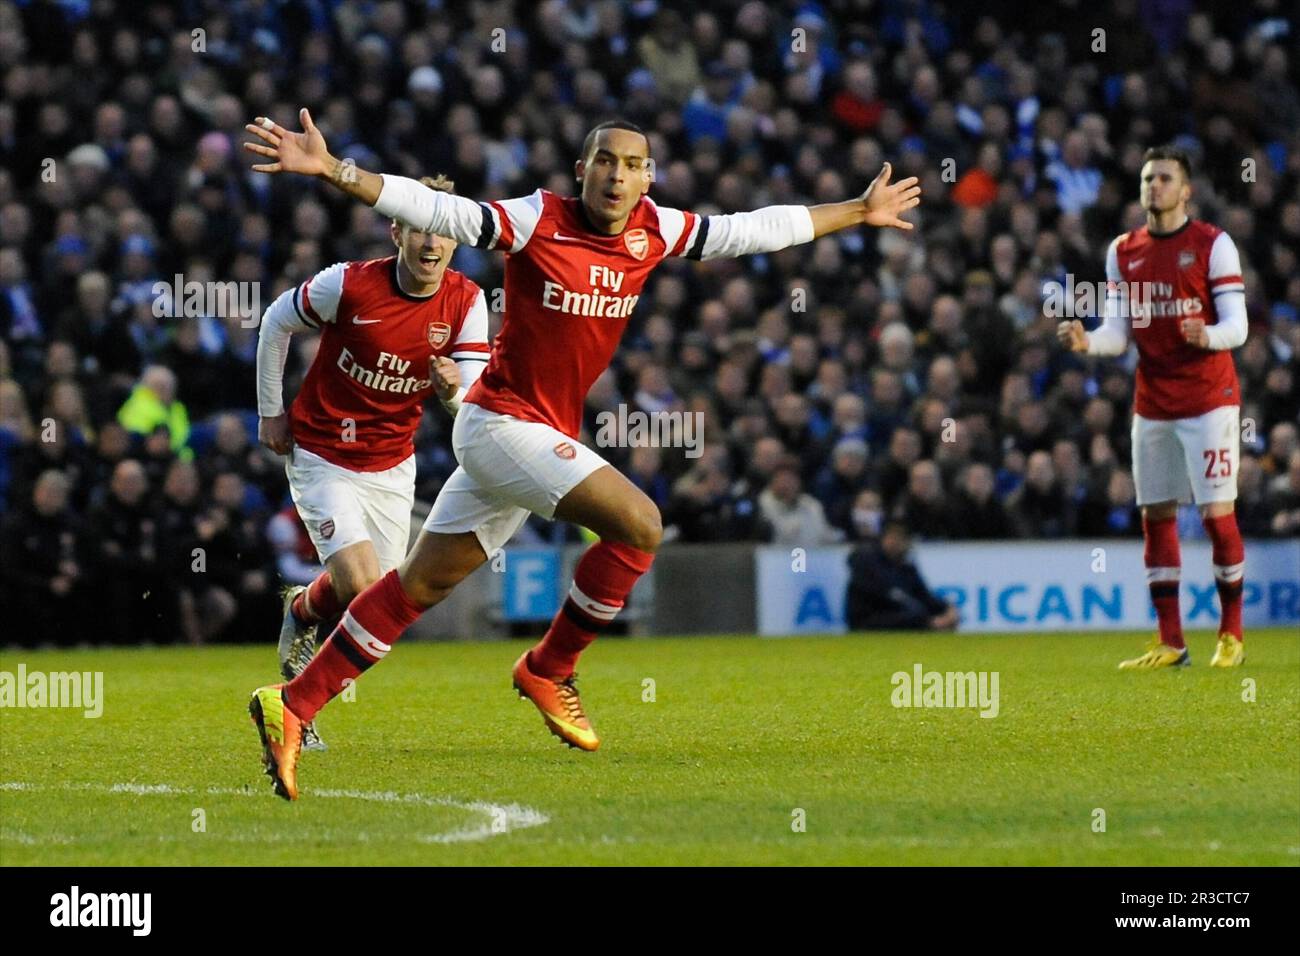 Theo Walcott of Arsenal celebrates scoring a goal during the FA Cup 4th Round match between Brighton & Hove Albion and Arsenal at the American Express Stock Photo